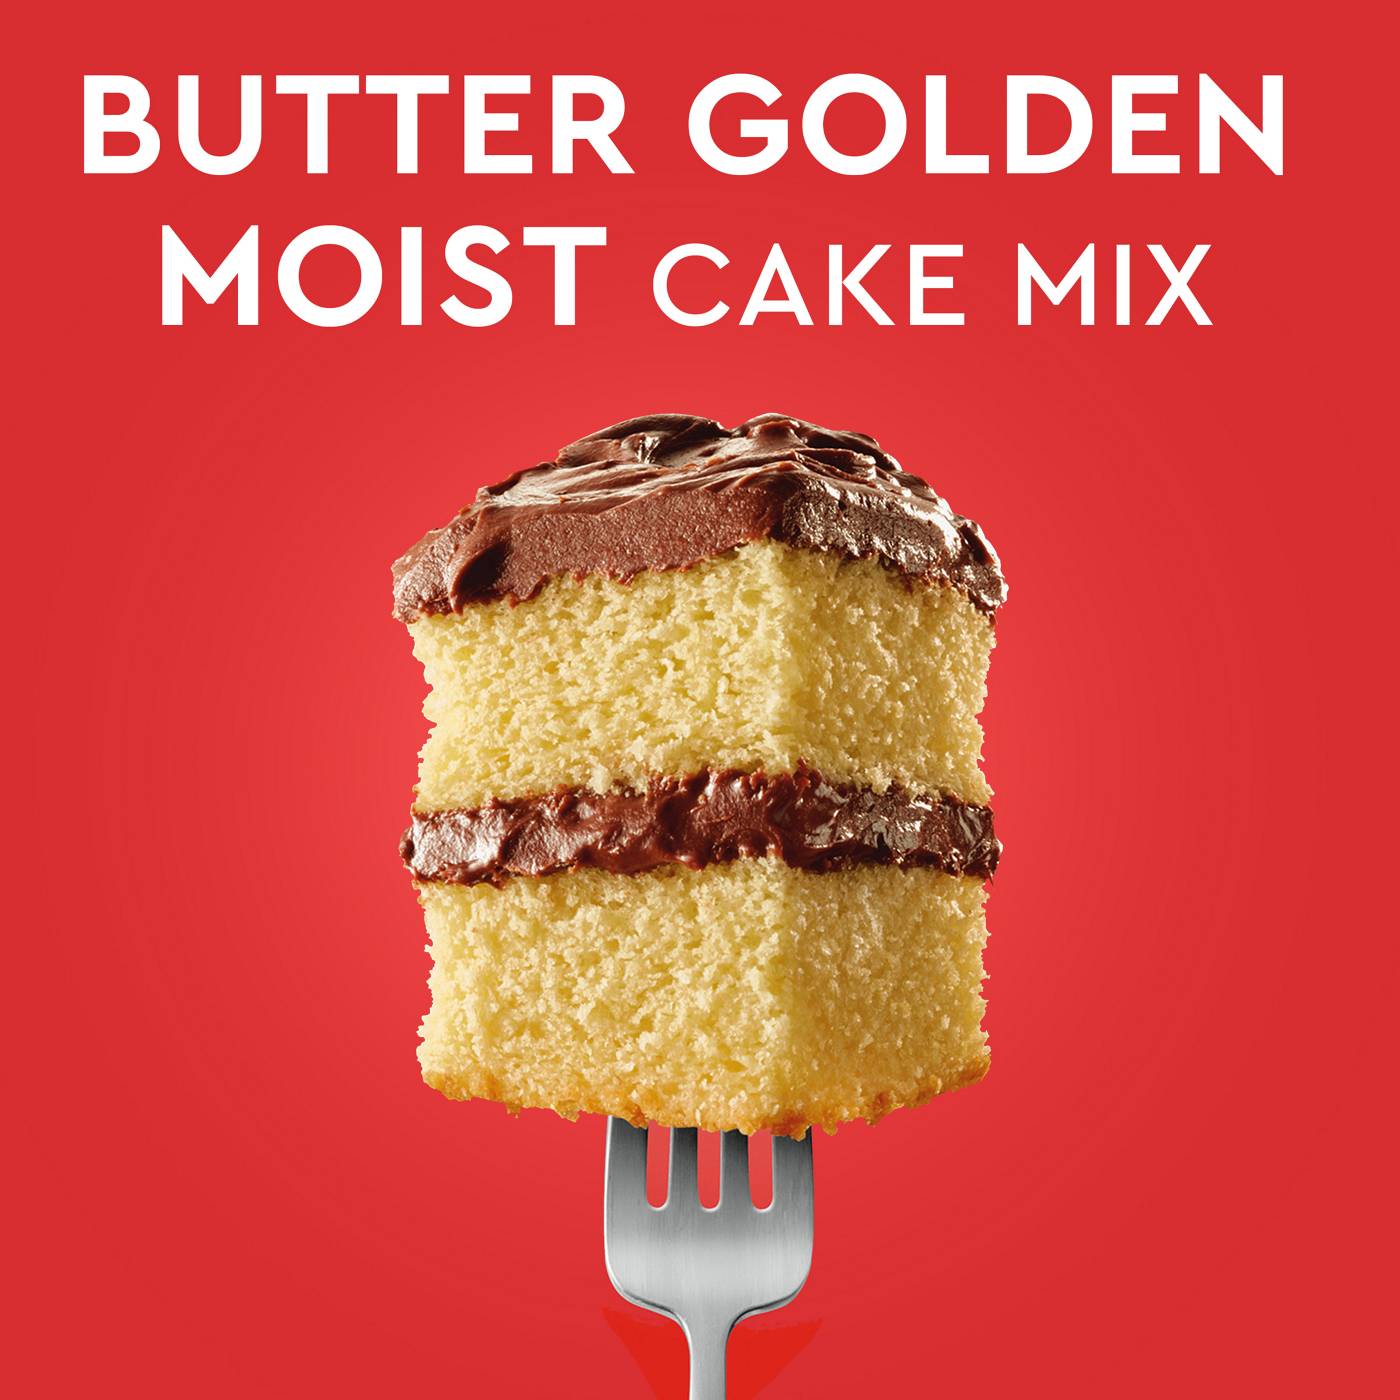 Duncan Hines Perfectly Moist Butter Golden Cake Mix; image 6 of 7